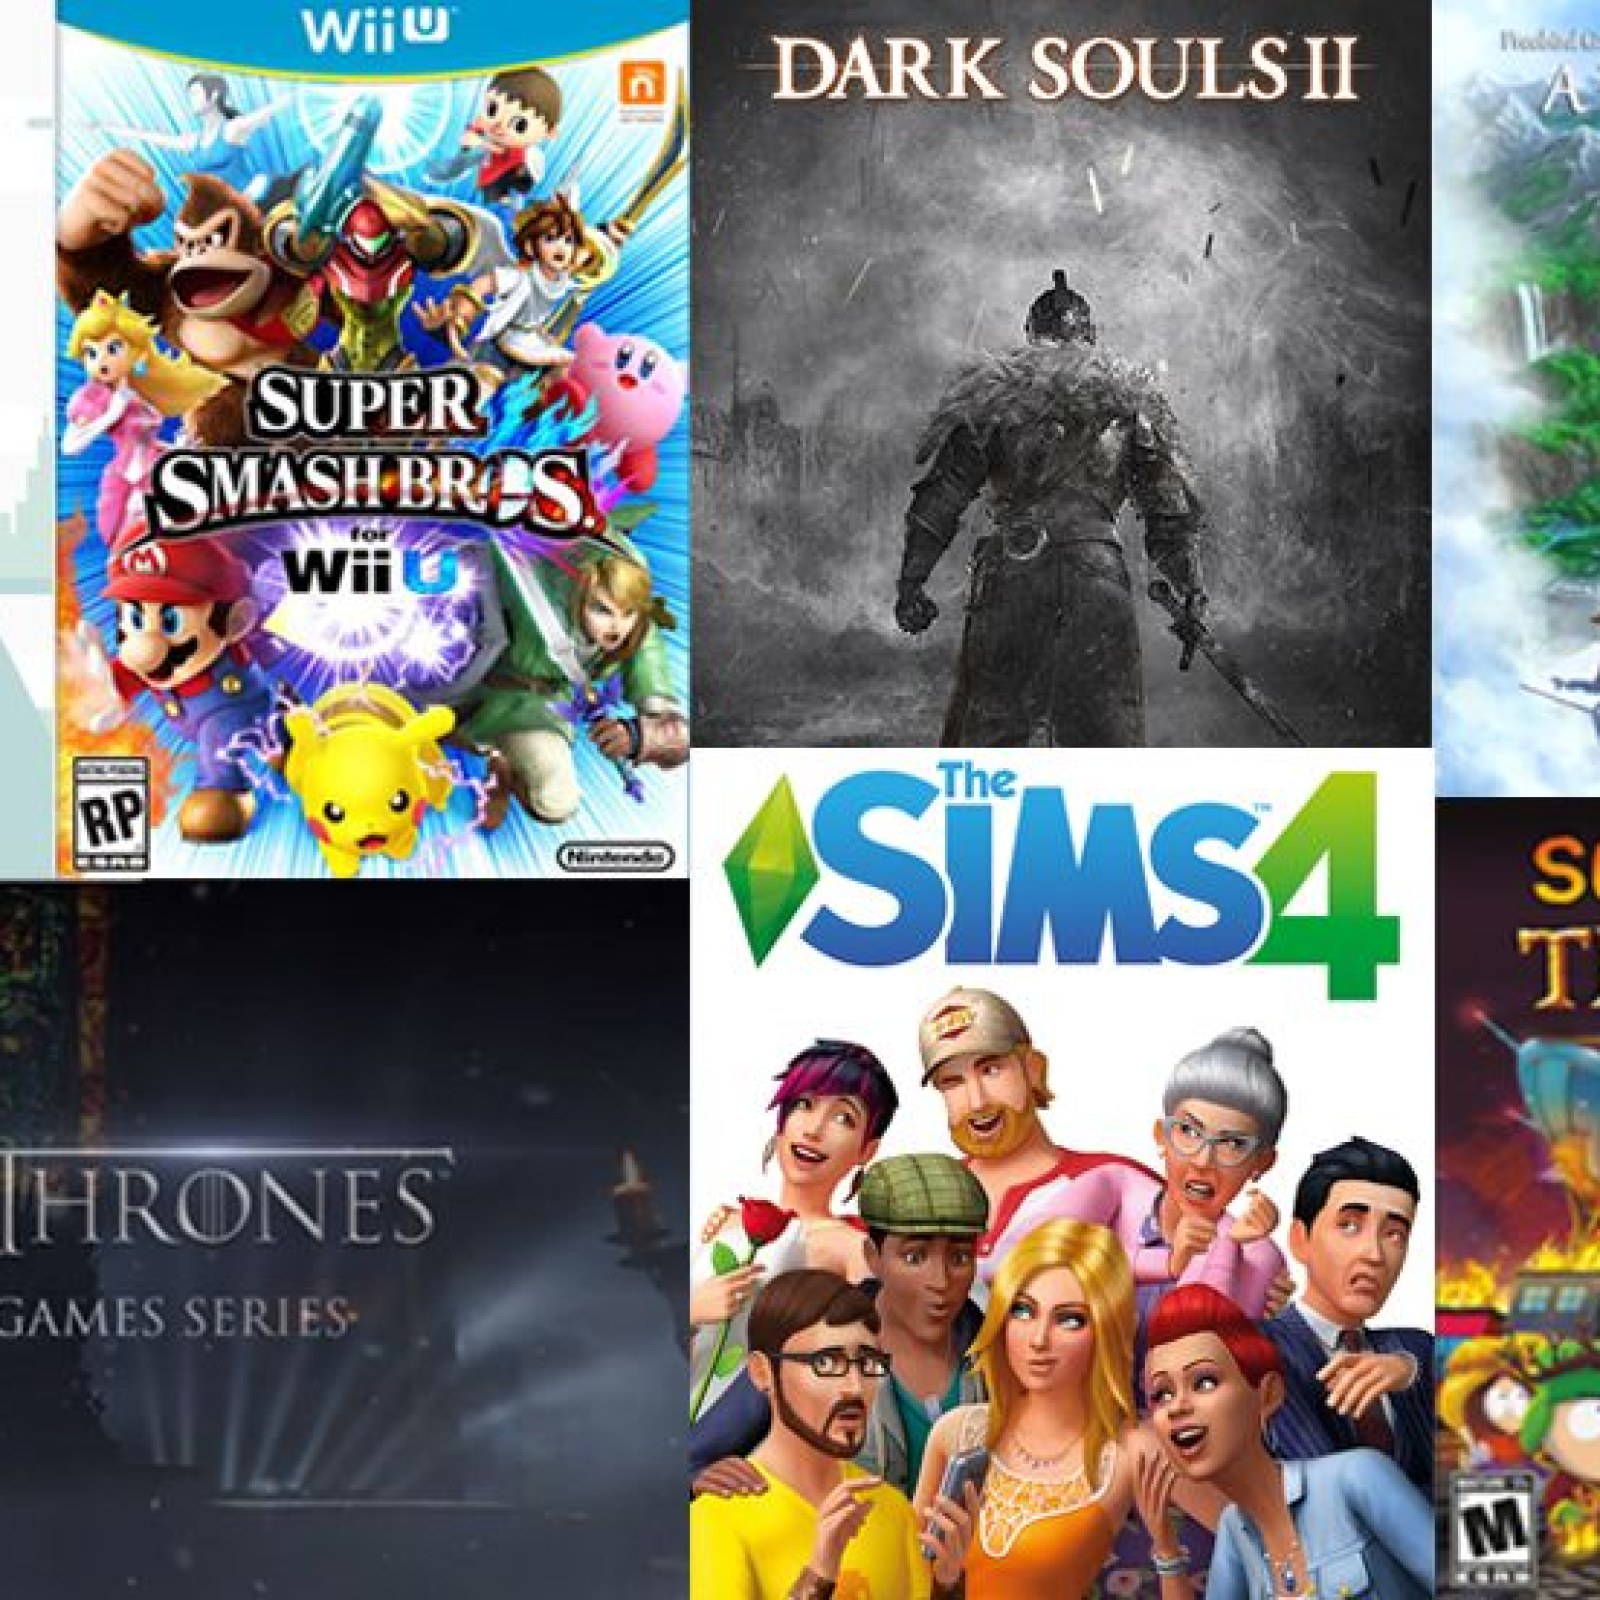 The Year in Video Games (and the Best of 2014)